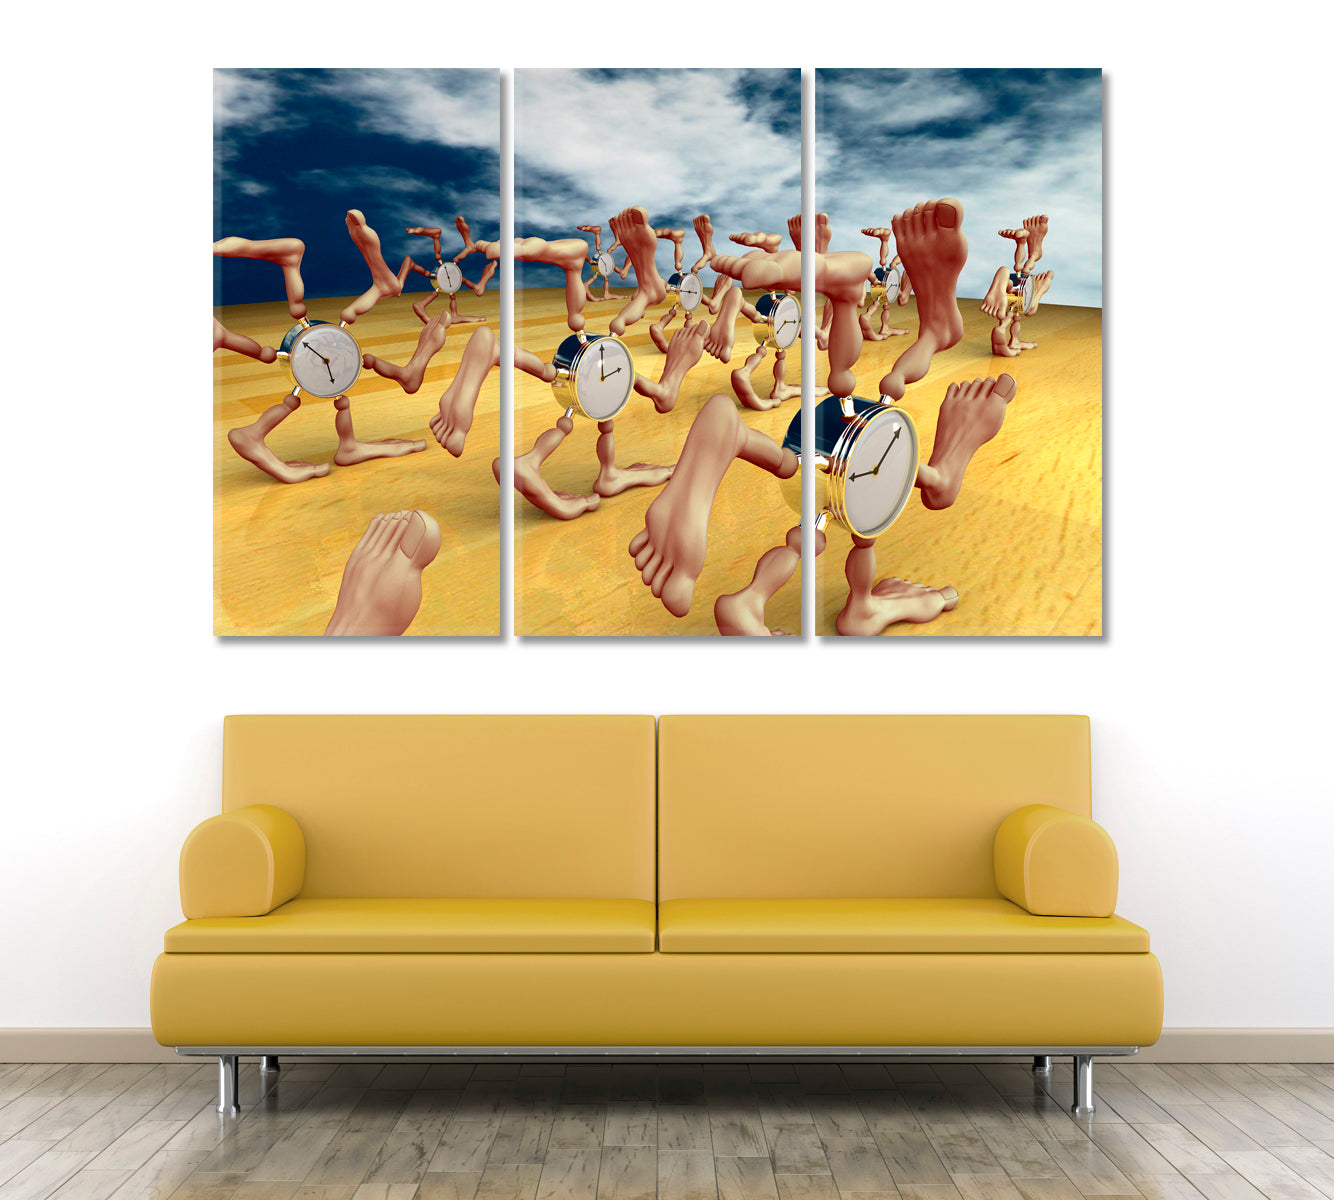 THE TIME HAS COME Inspirid by Dali Running Сlocks with Lots of Legs Surreal Fantasy Large Art Print Décor Artesty 3 panels 36" x 24" 